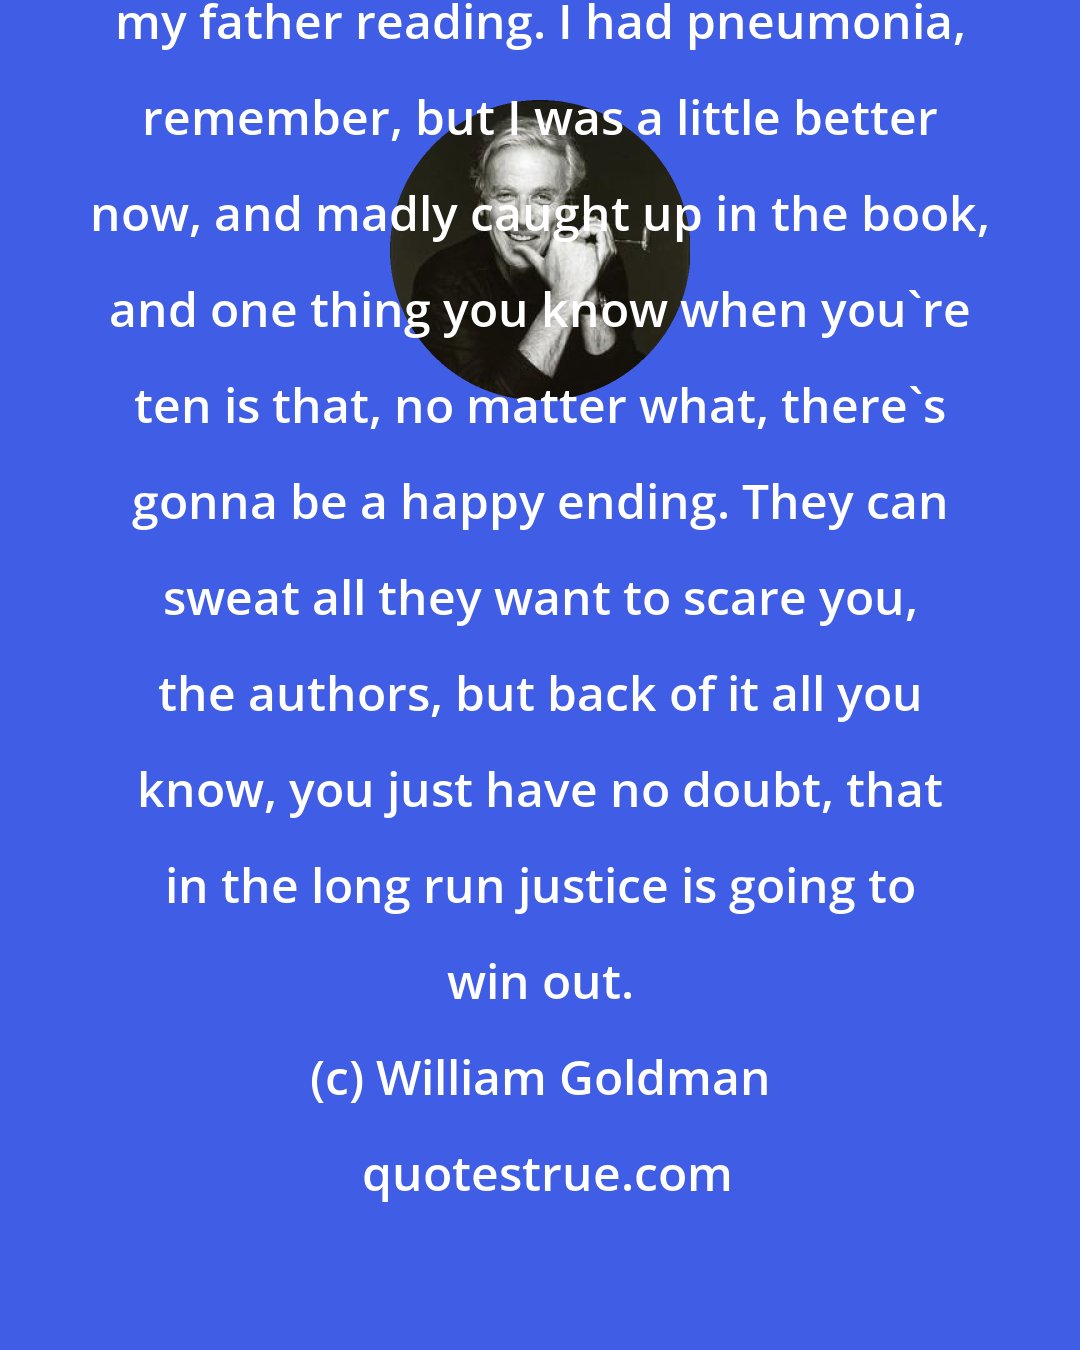 William Goldman: It's one of my biggest memories of my father reading. I had pneumonia, remember, but I was a little better now, and madly caught up in the book, and one thing you know when you're ten is that, no matter what, there's gonna be a happy ending. They can sweat all they want to scare you, the authors, but back of it all you know, you just have no doubt, that in the long run justice is going to win out.